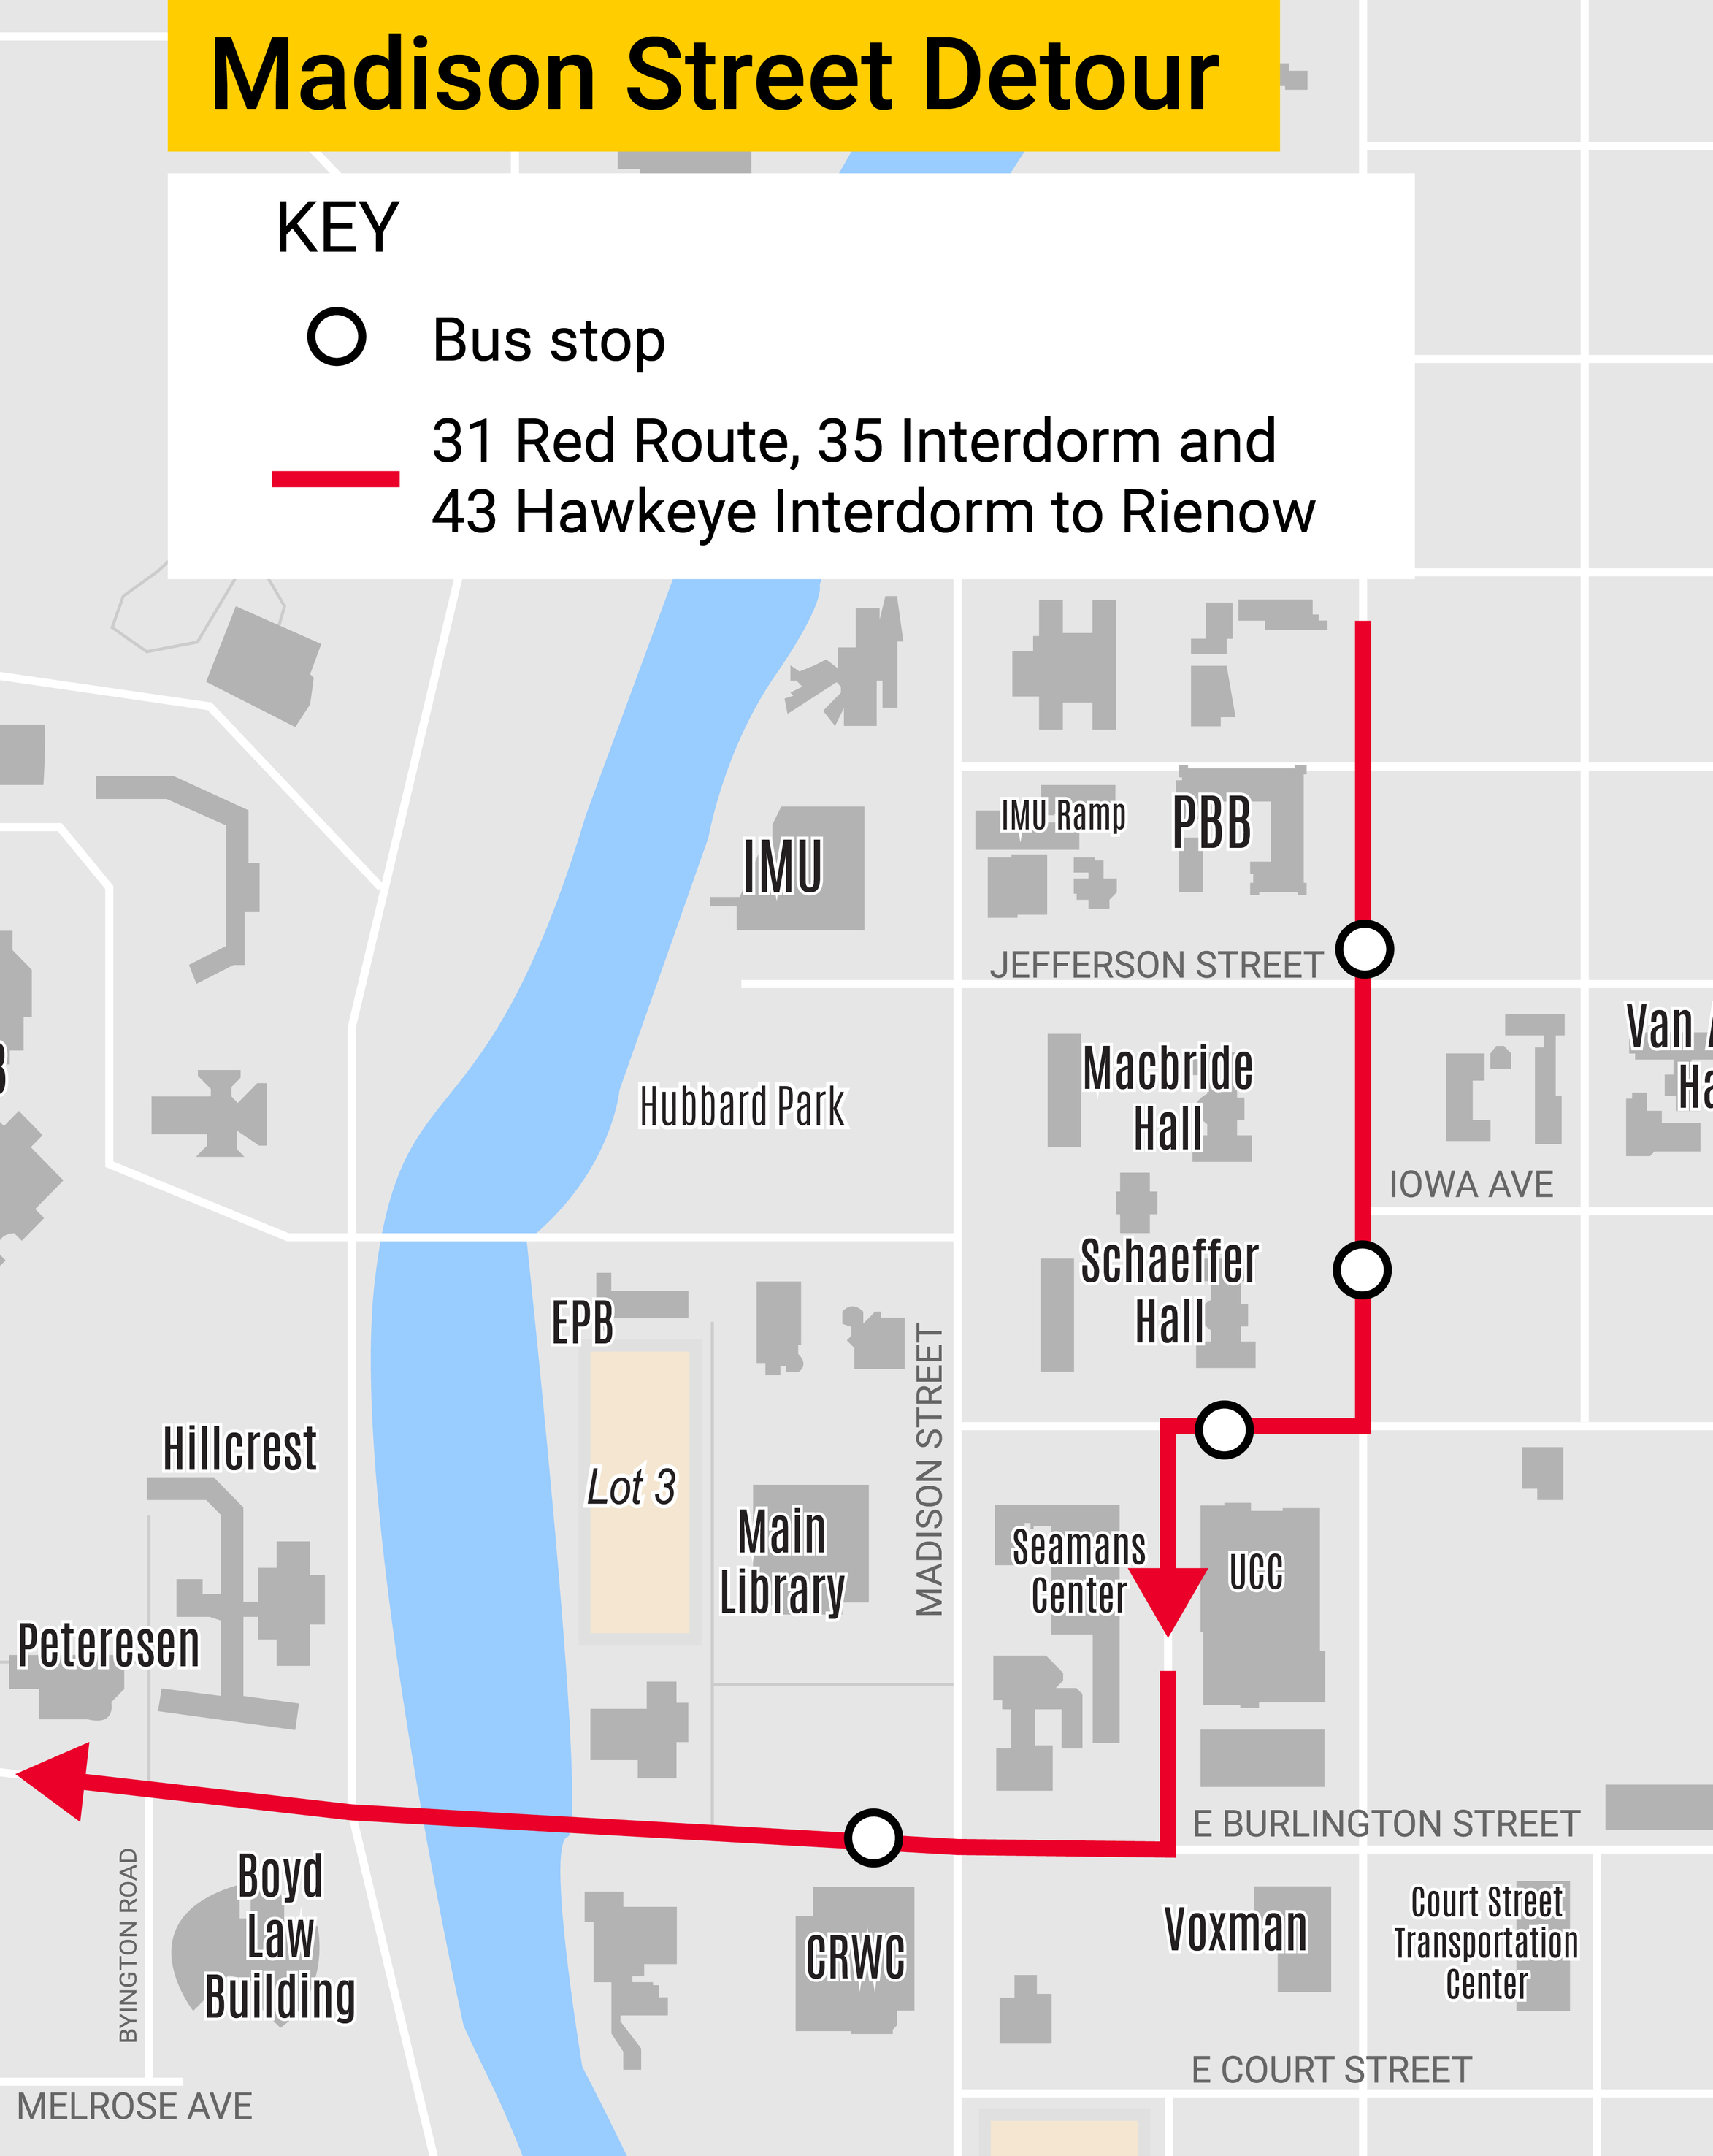 map of detoured routes during utility work on Madison Street